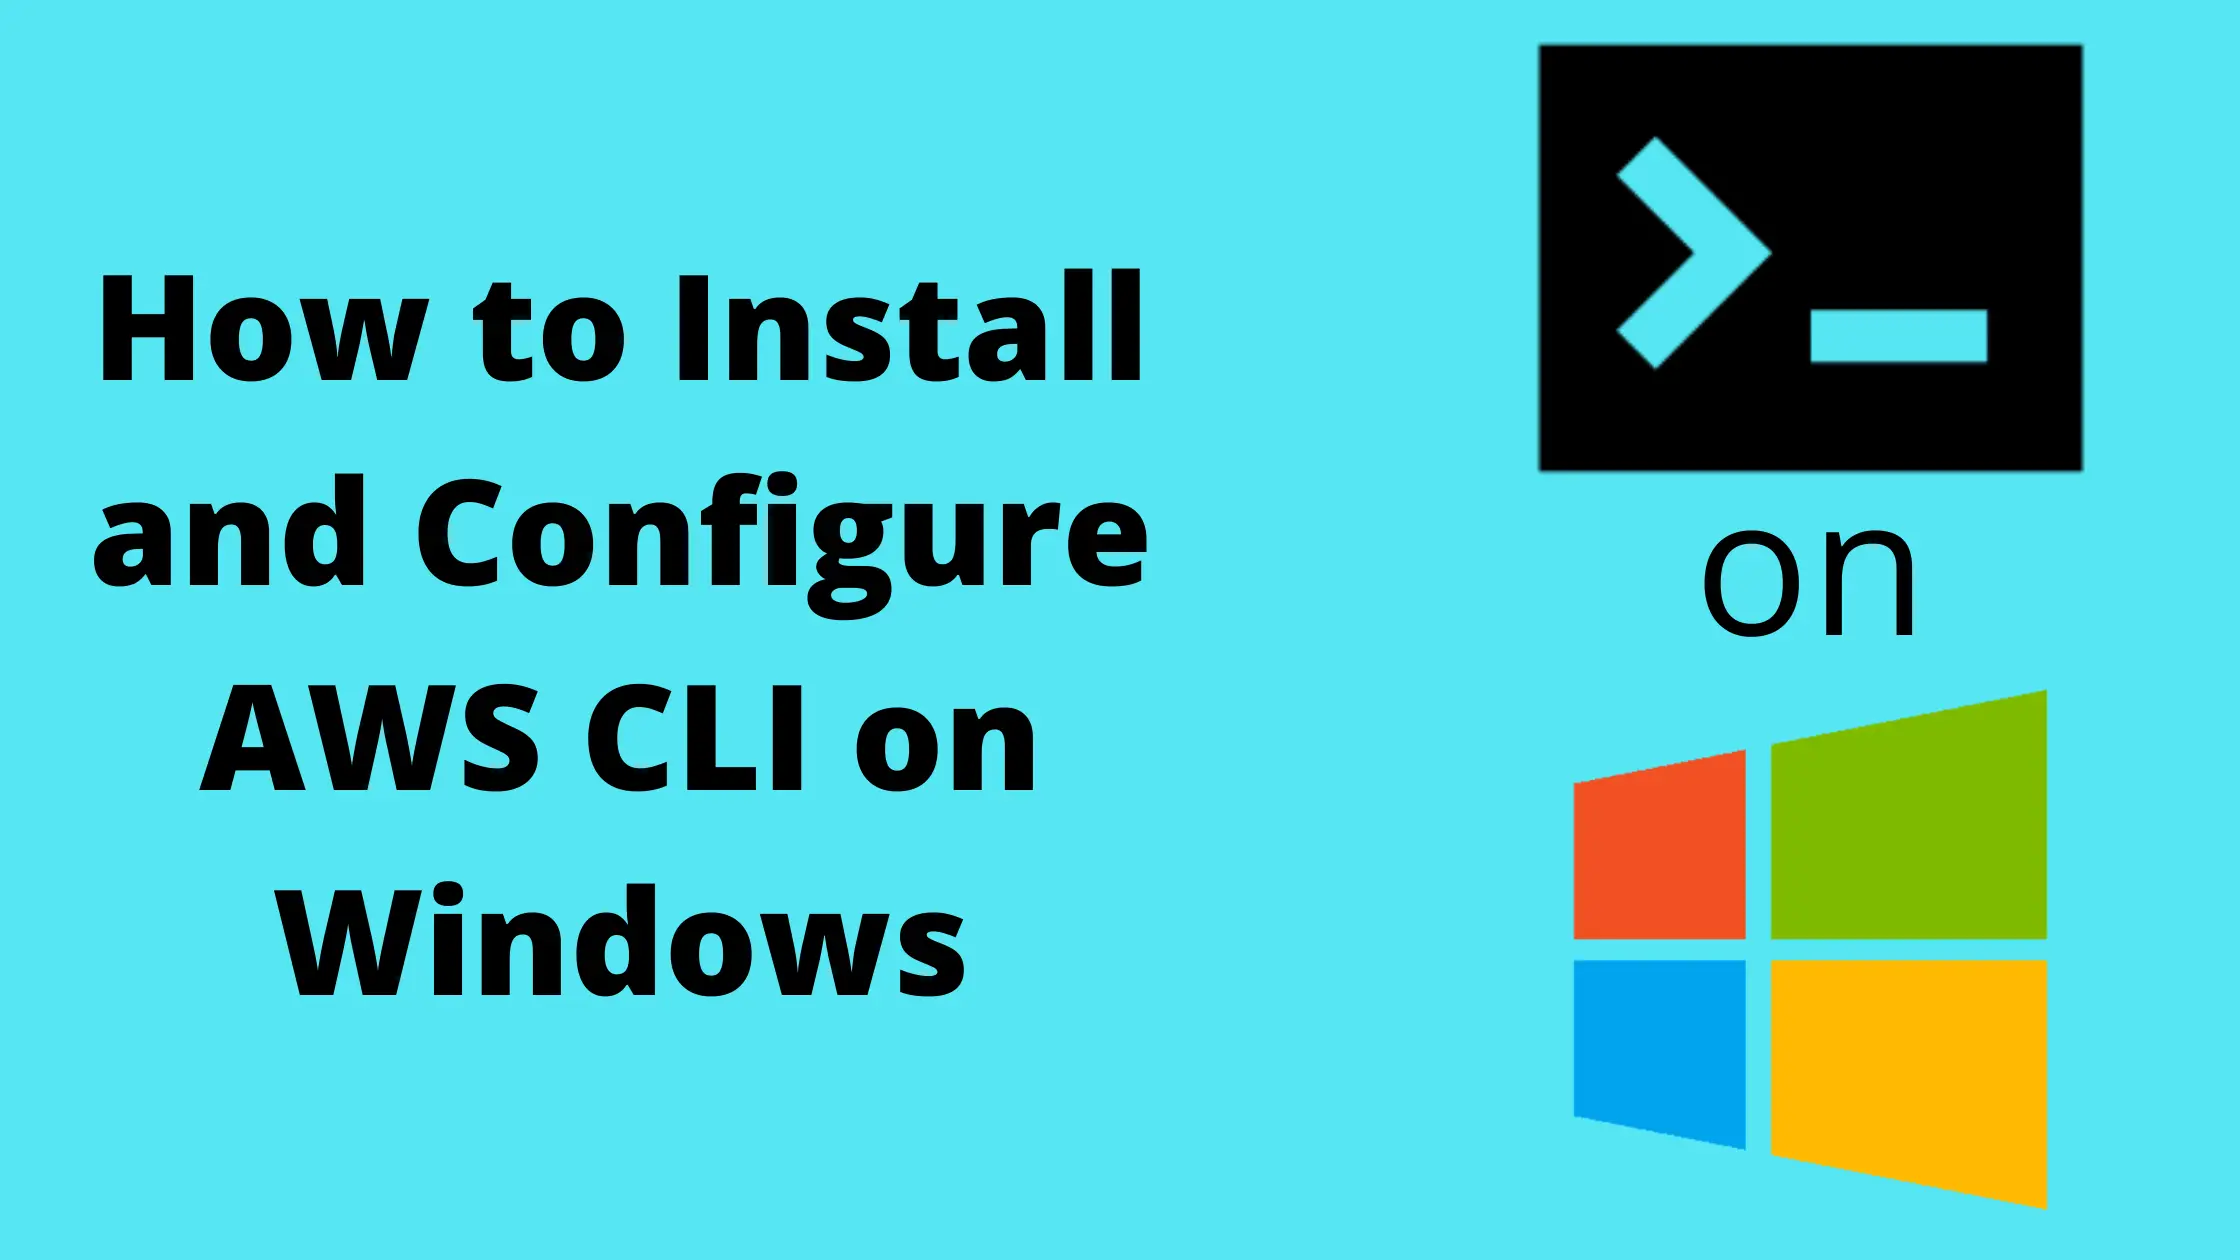 How to Install and Configure AWS CLI on Windows